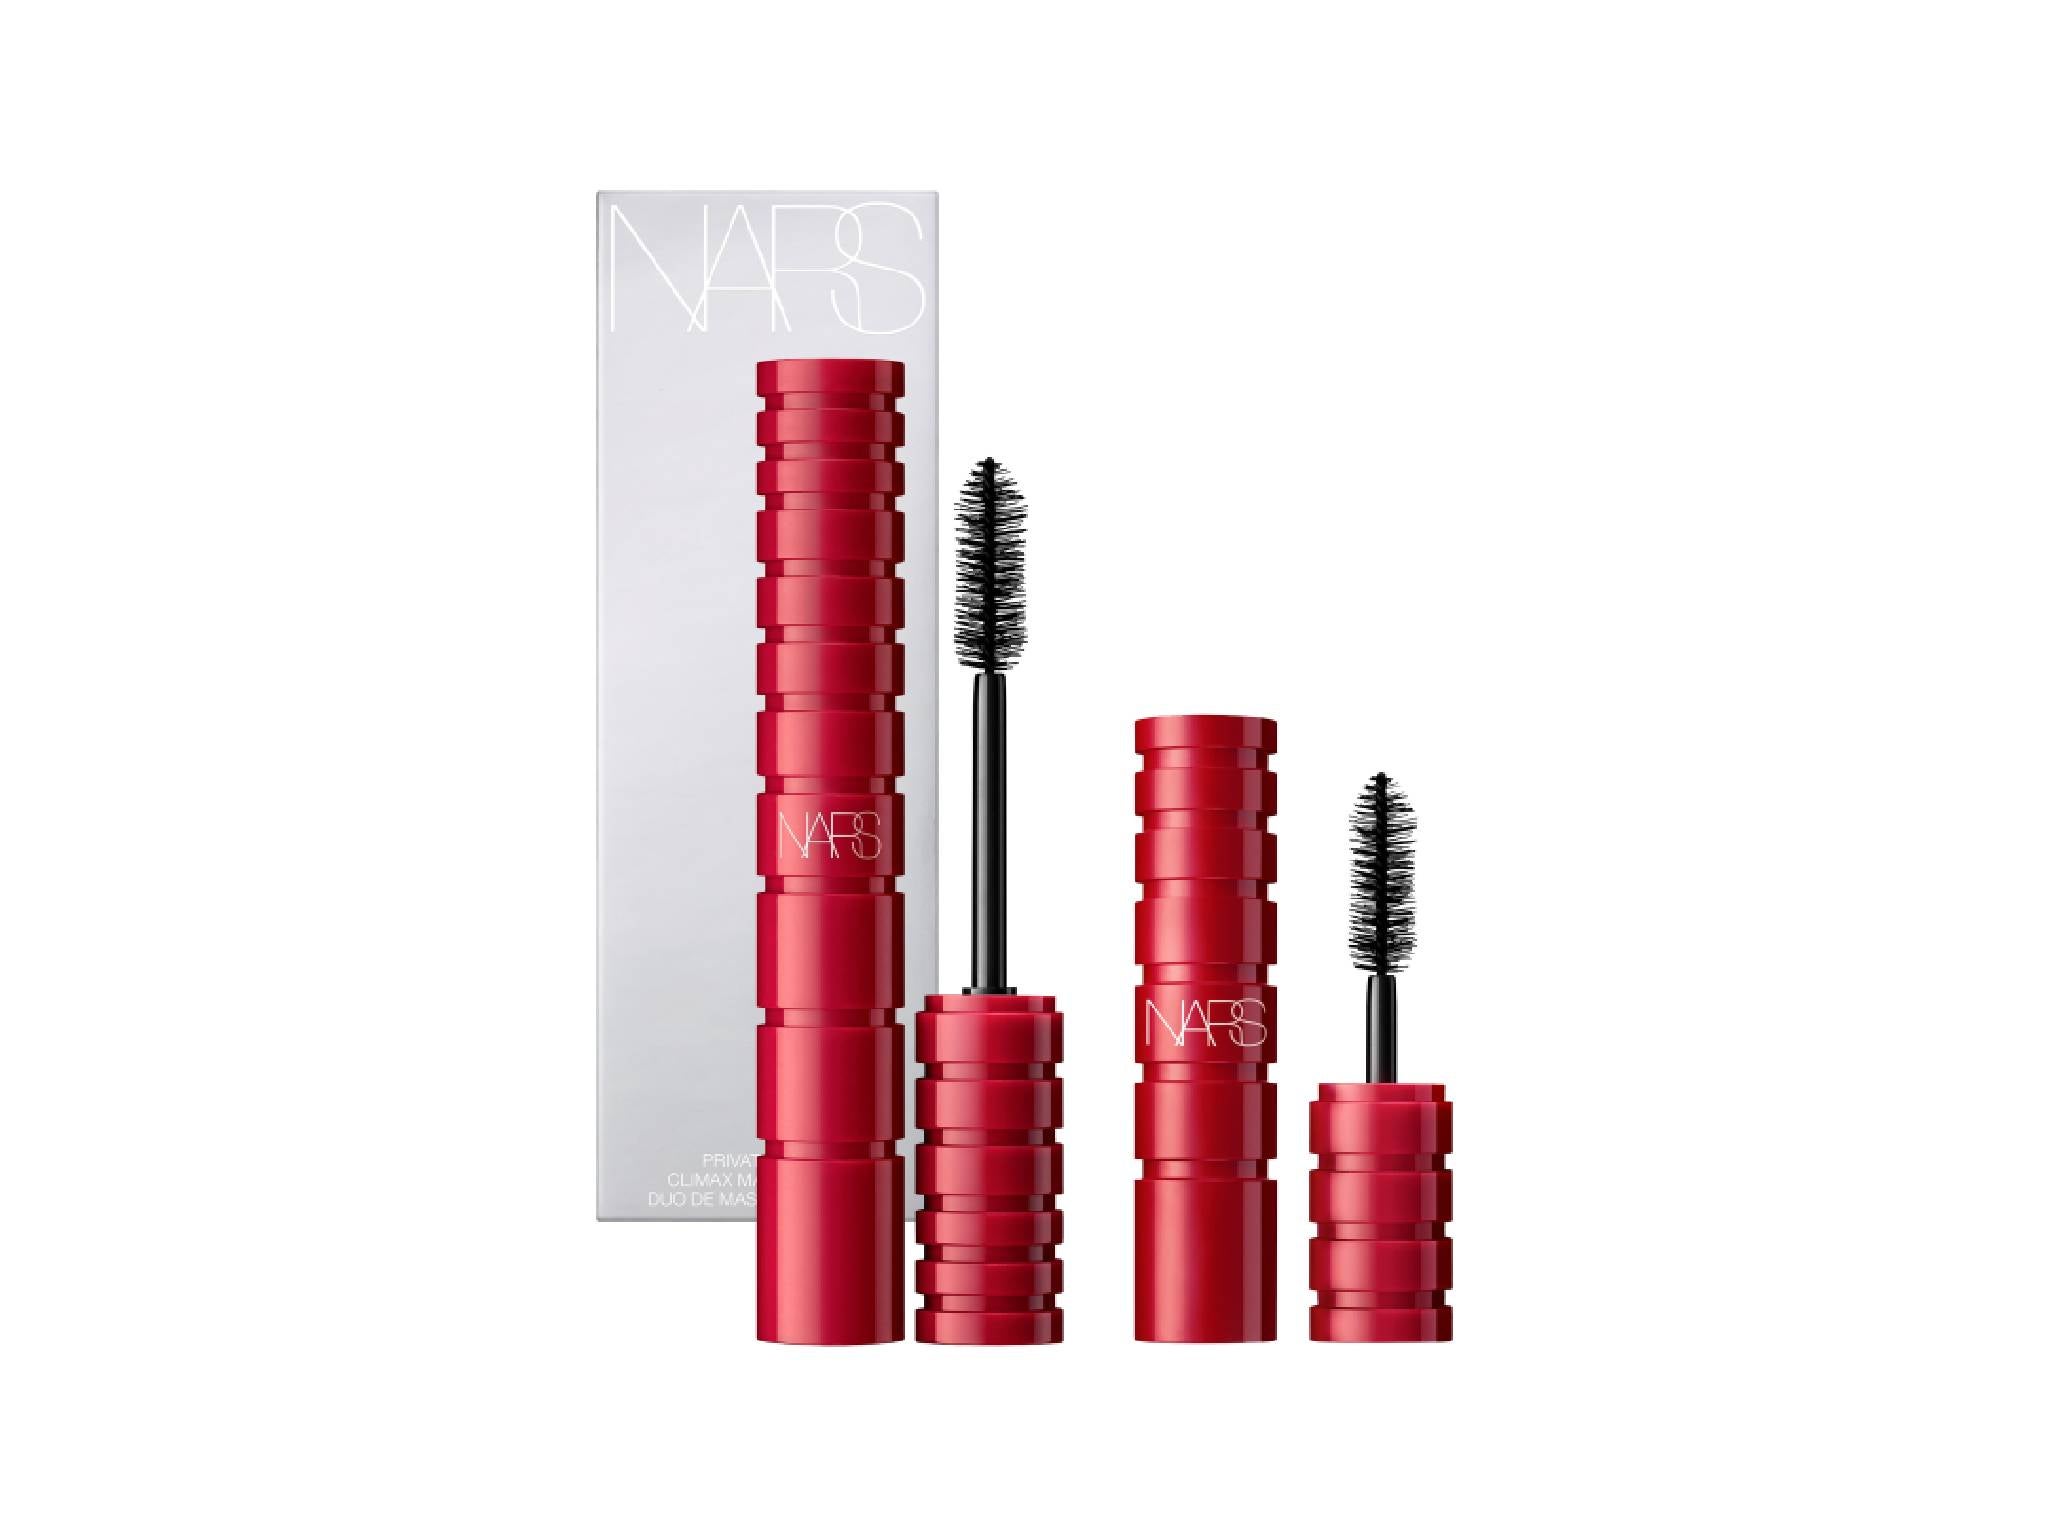 Nars private party climax mascara duo